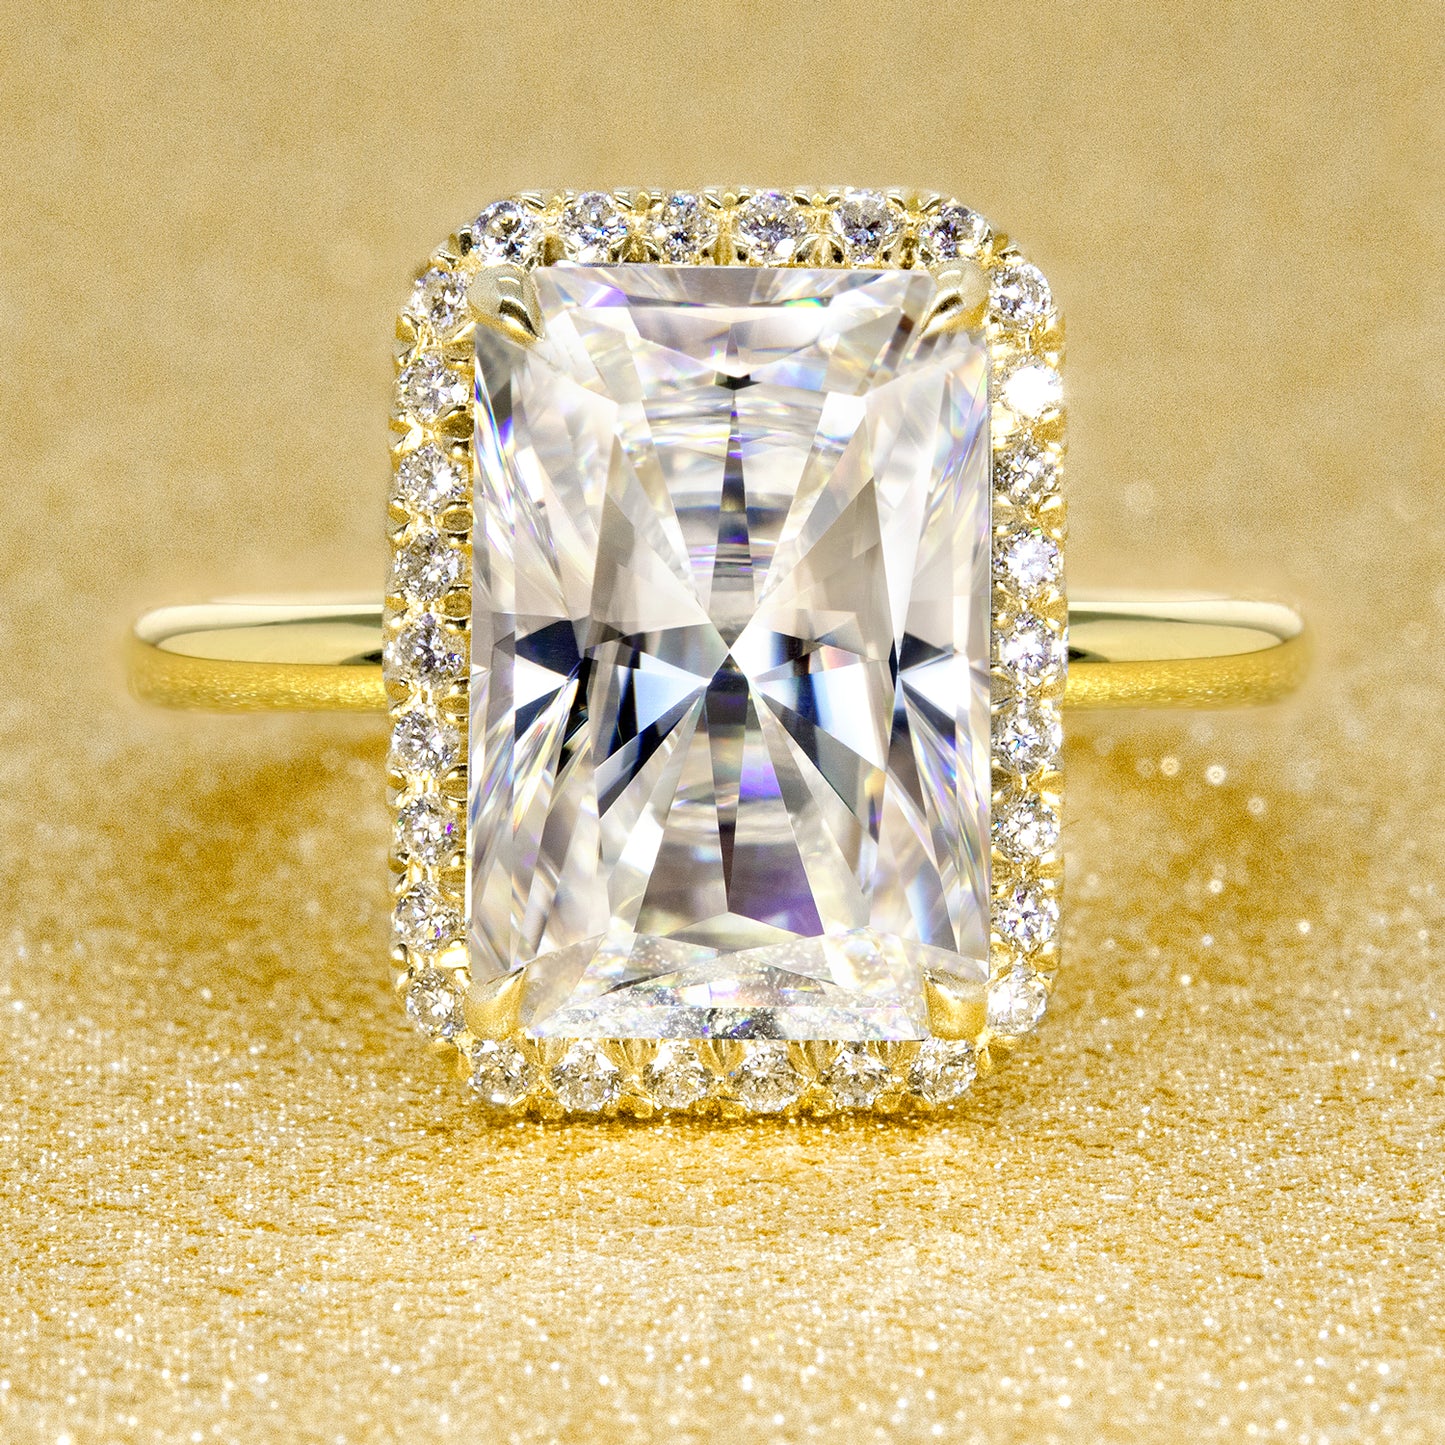 14K Gold 4.5ct Elongated Radiant-cut Halo Engagement Ring | Earthena Jewelry